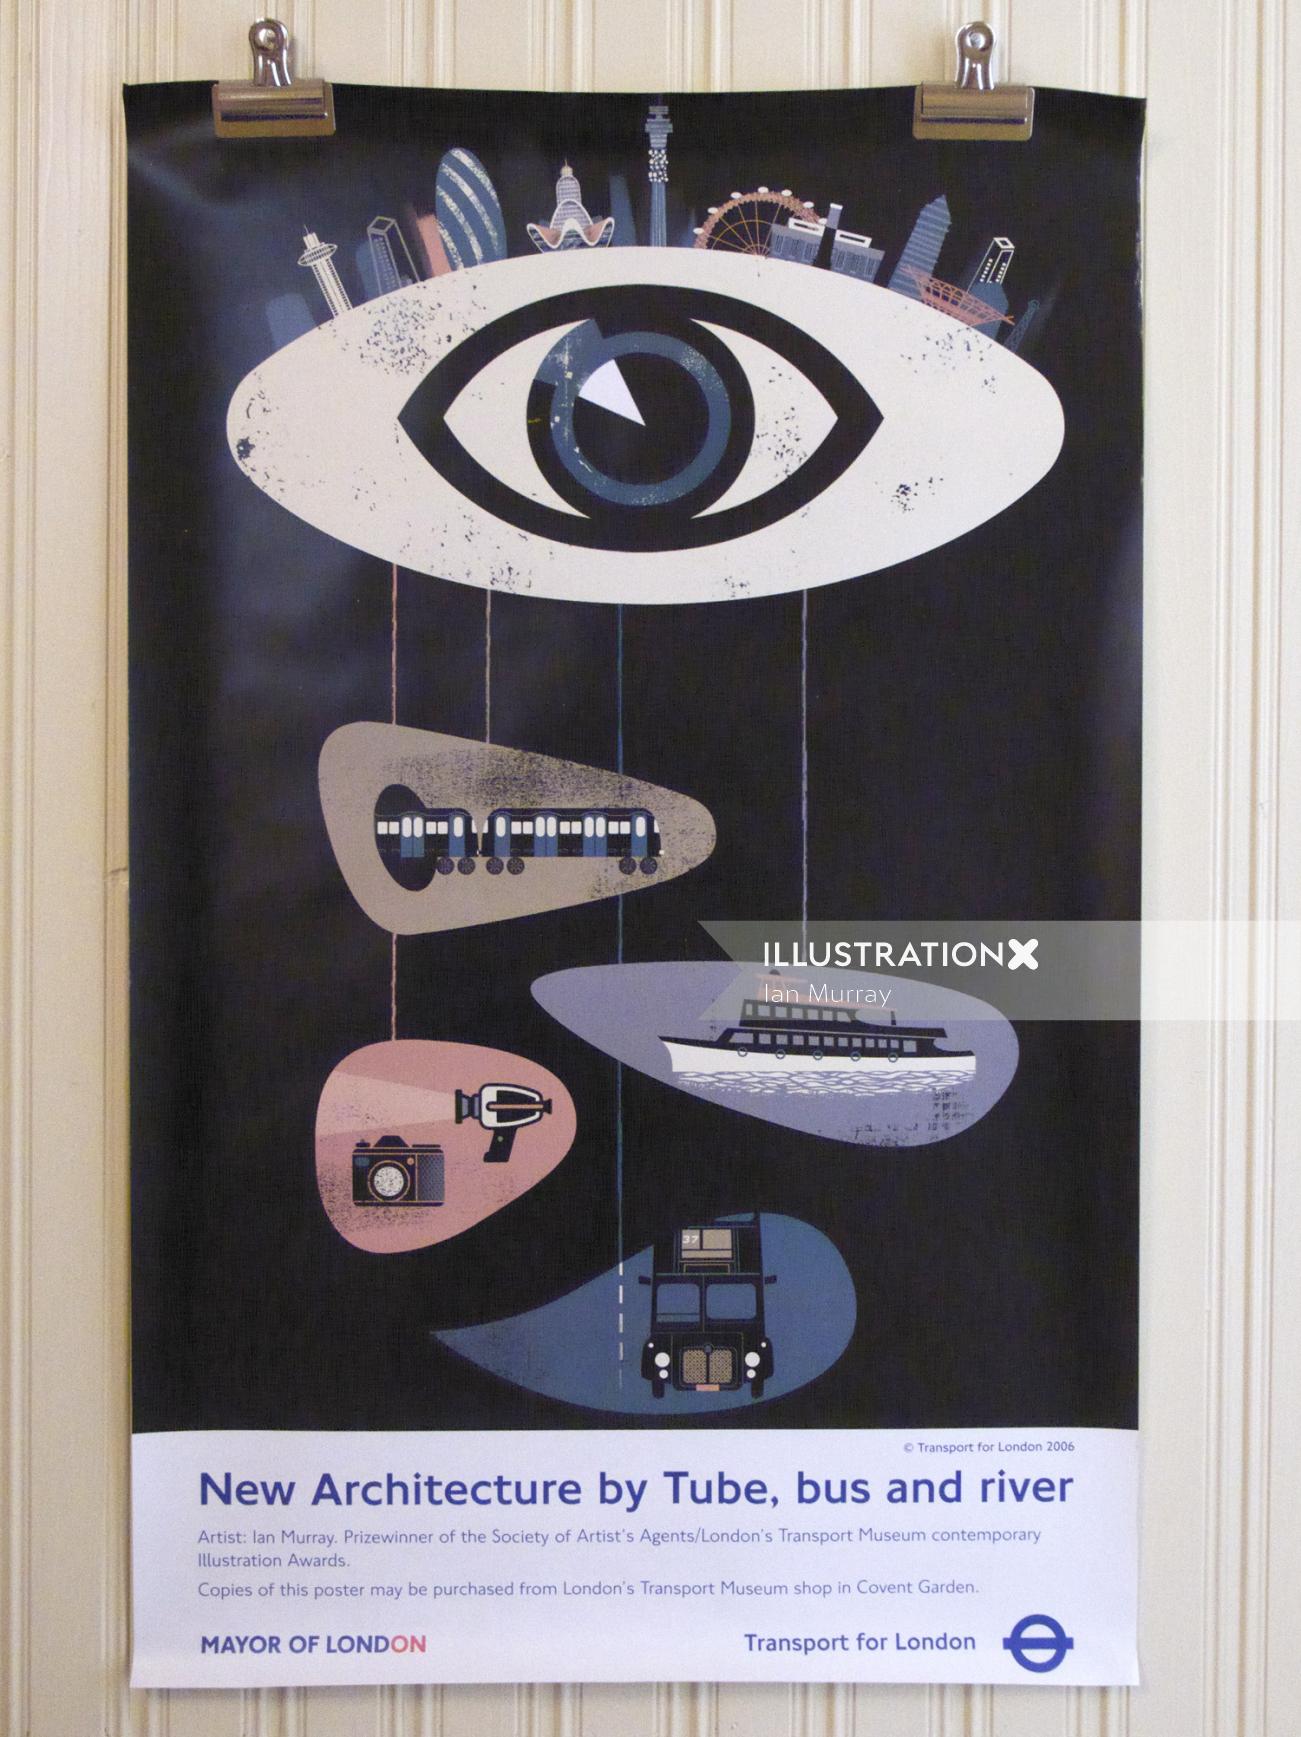 Poster design of Ian Murray wins in Transport Museum contemporary illustrations Awards